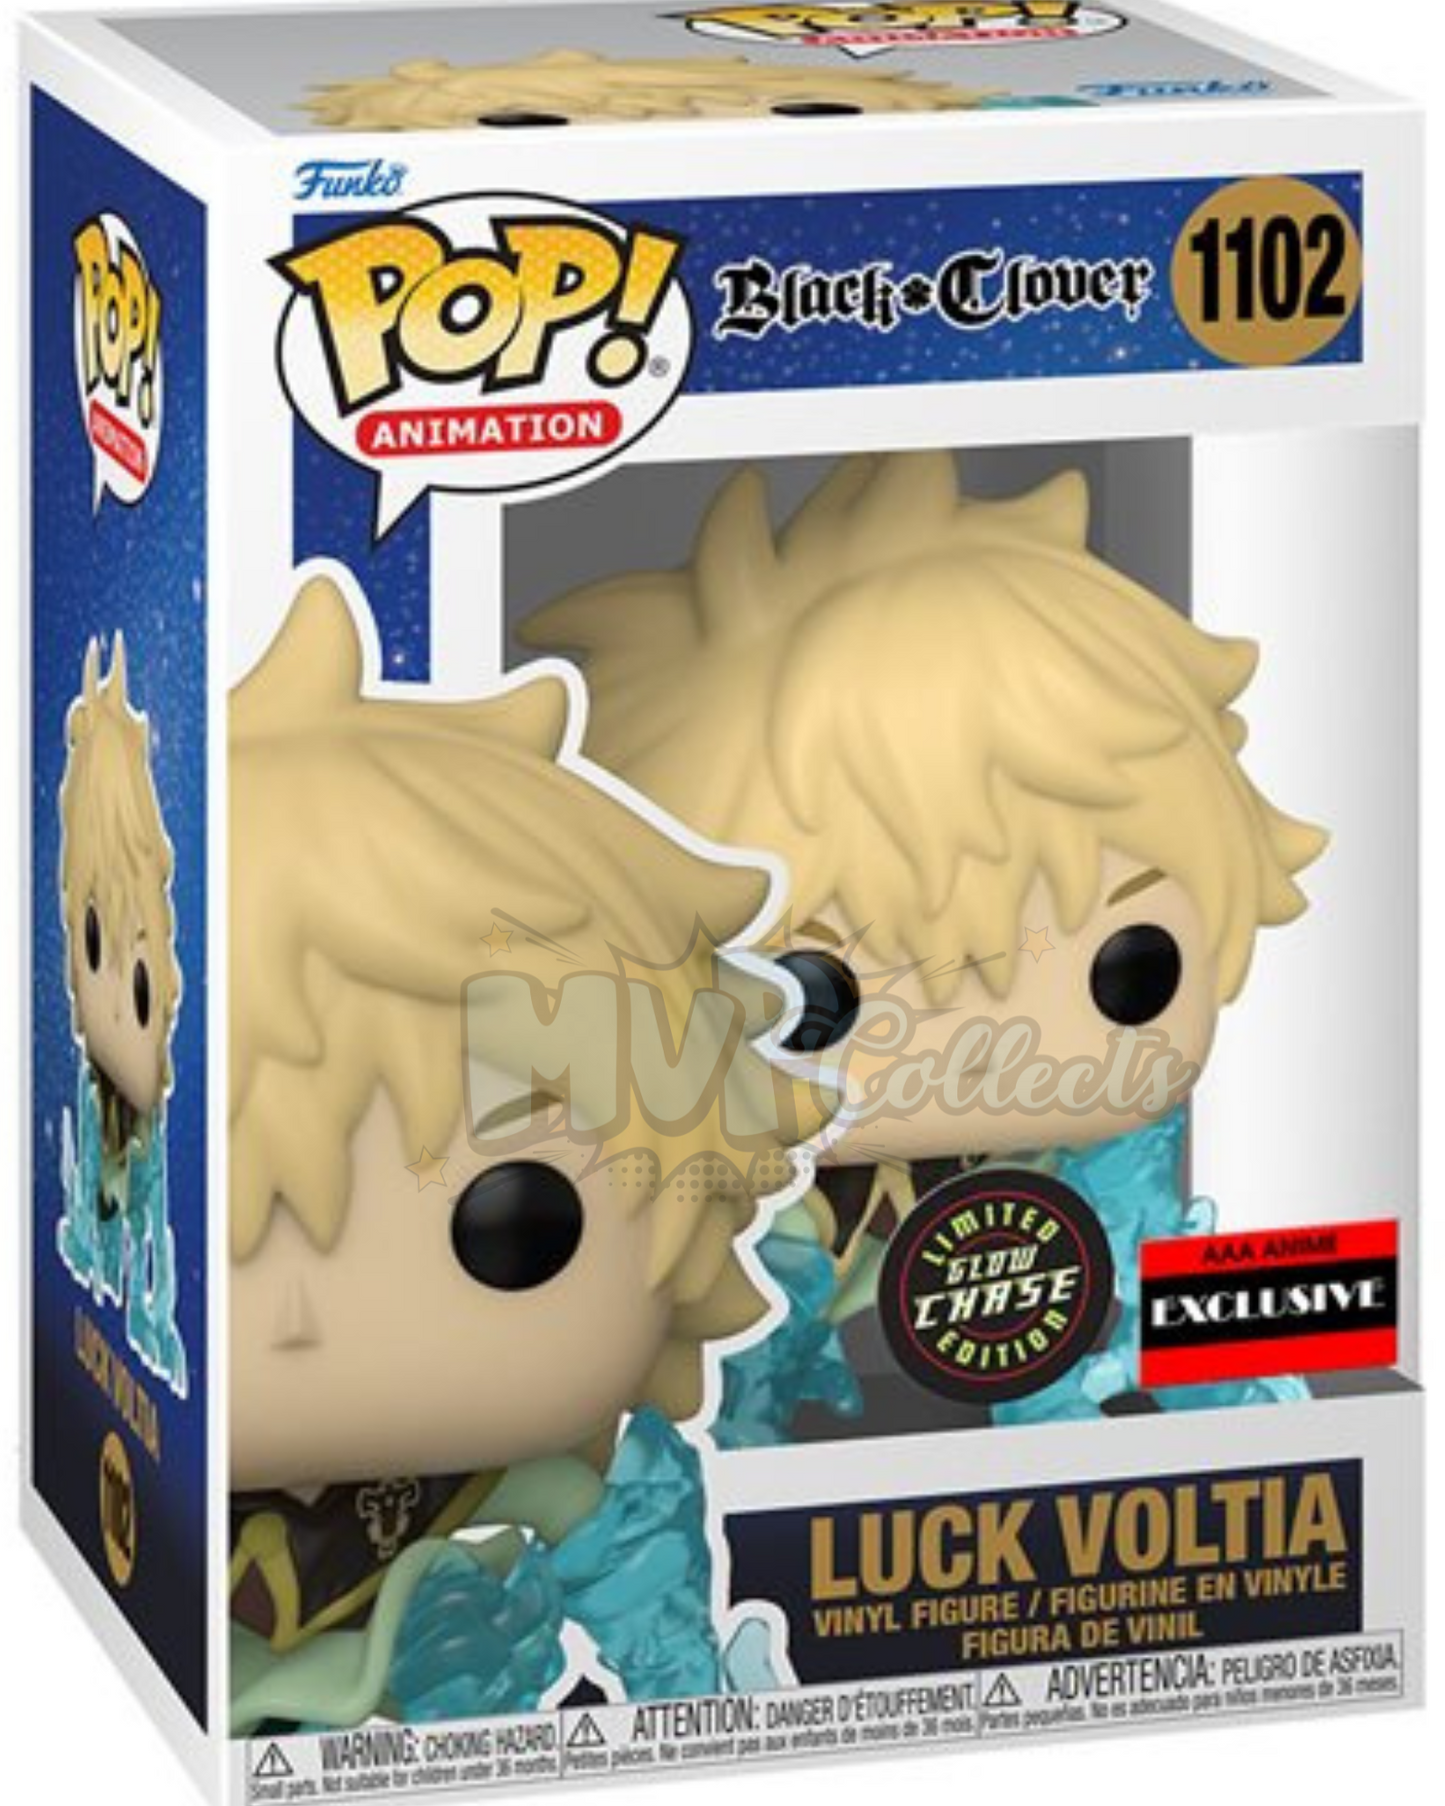 Luck Voltia Glow Chase AAA Exclusive POP! Black Clover - 1102